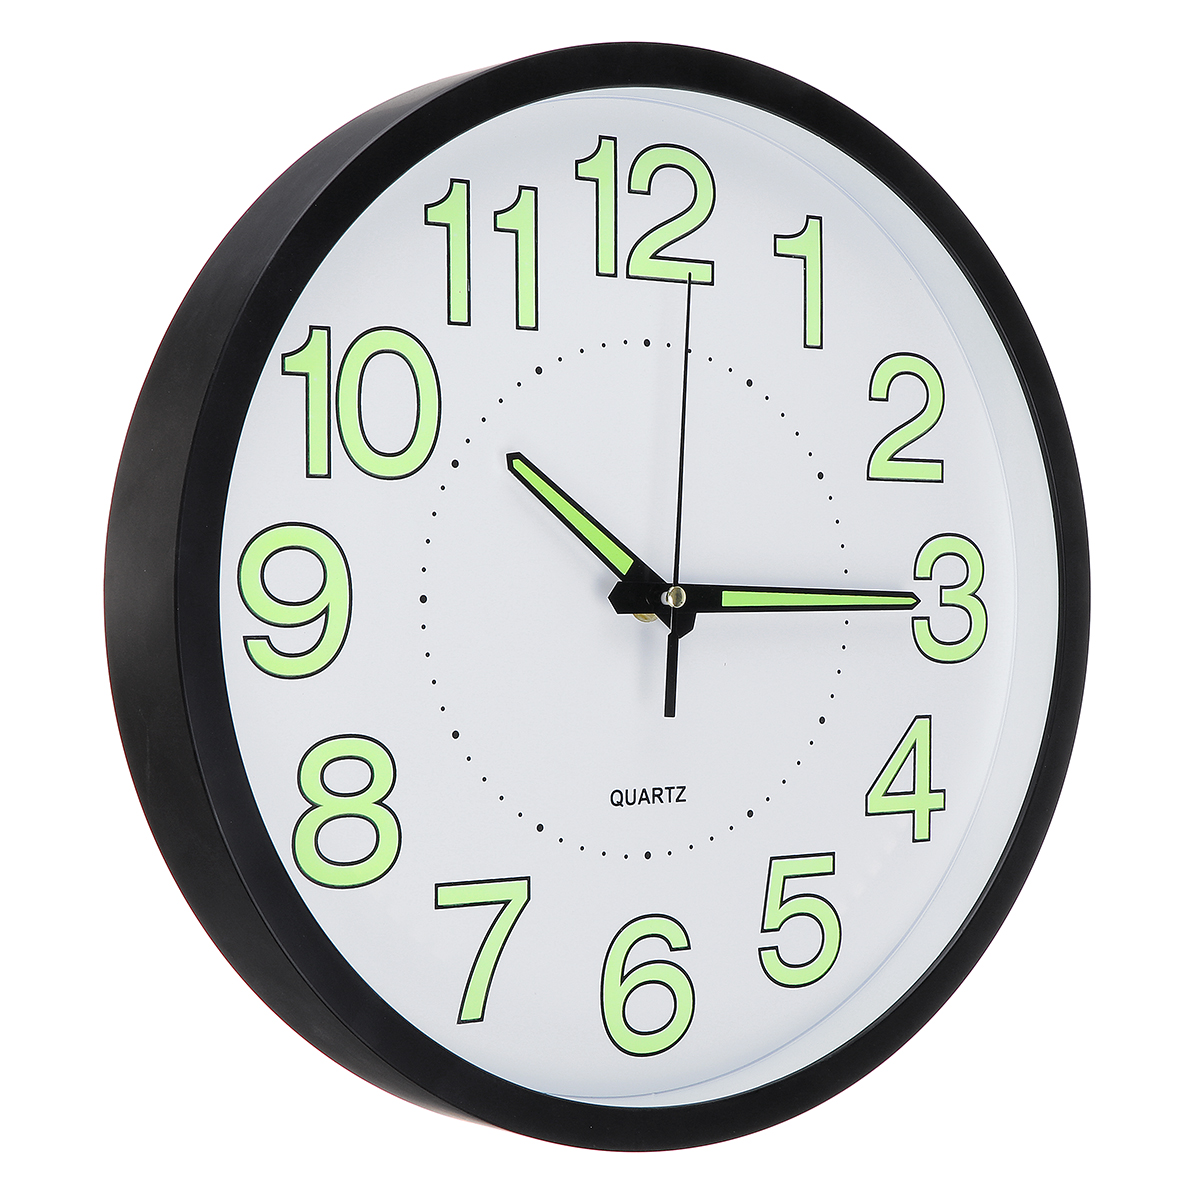 Find 12 Luminous Wall Clock Glow In The Dark Silent Quartz Indoor Outdoor Home for Sale on Gipsybee.com with cryptocurrencies